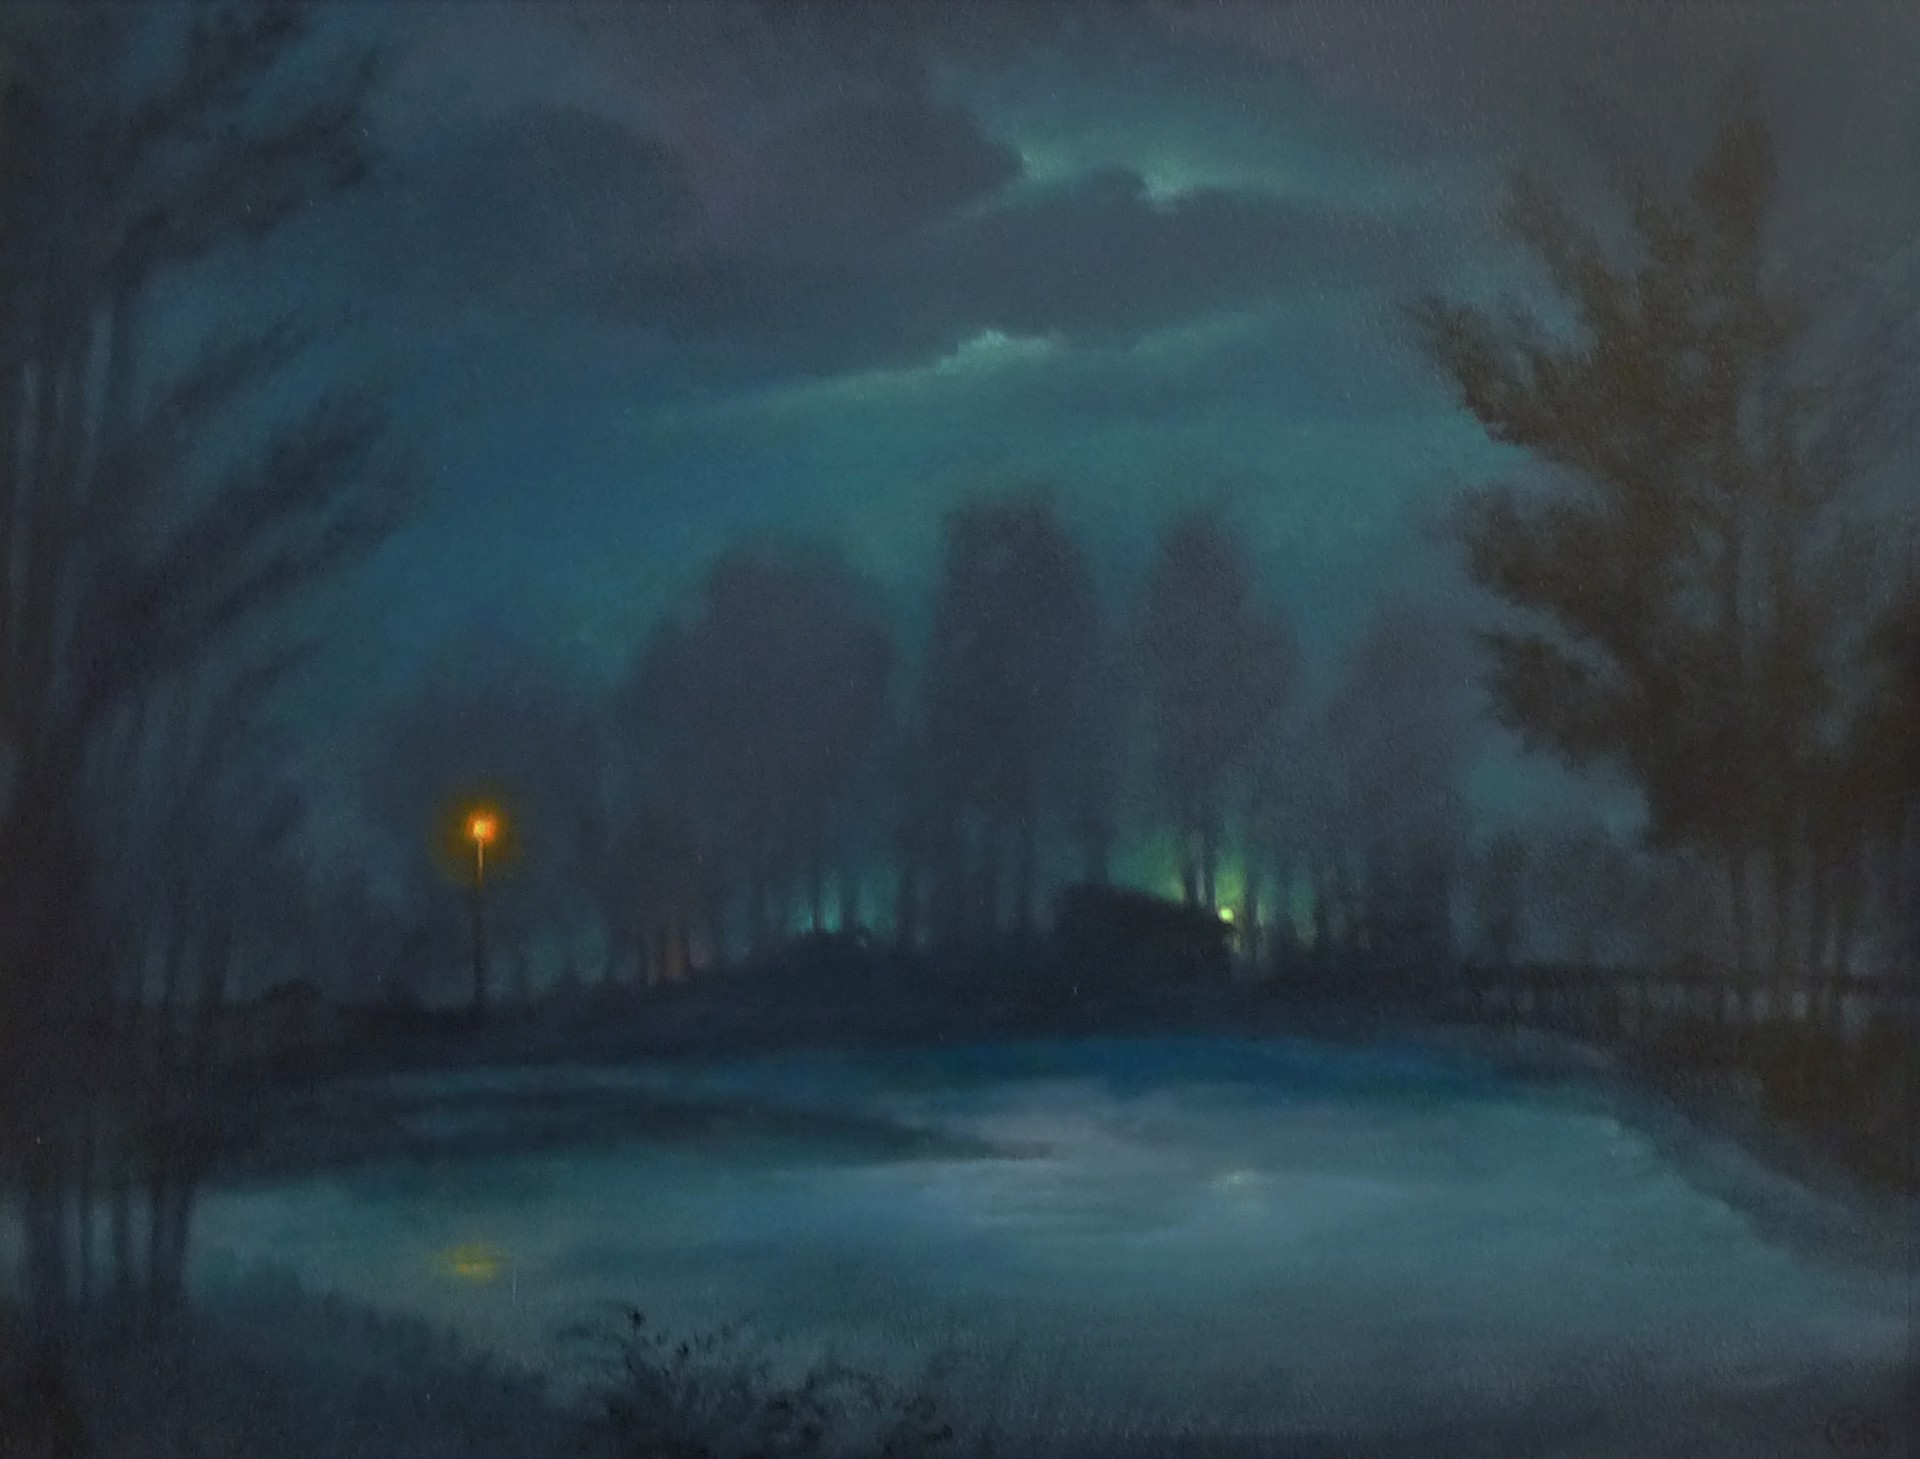 Night Lights Across the Lake by Gregory Schulte